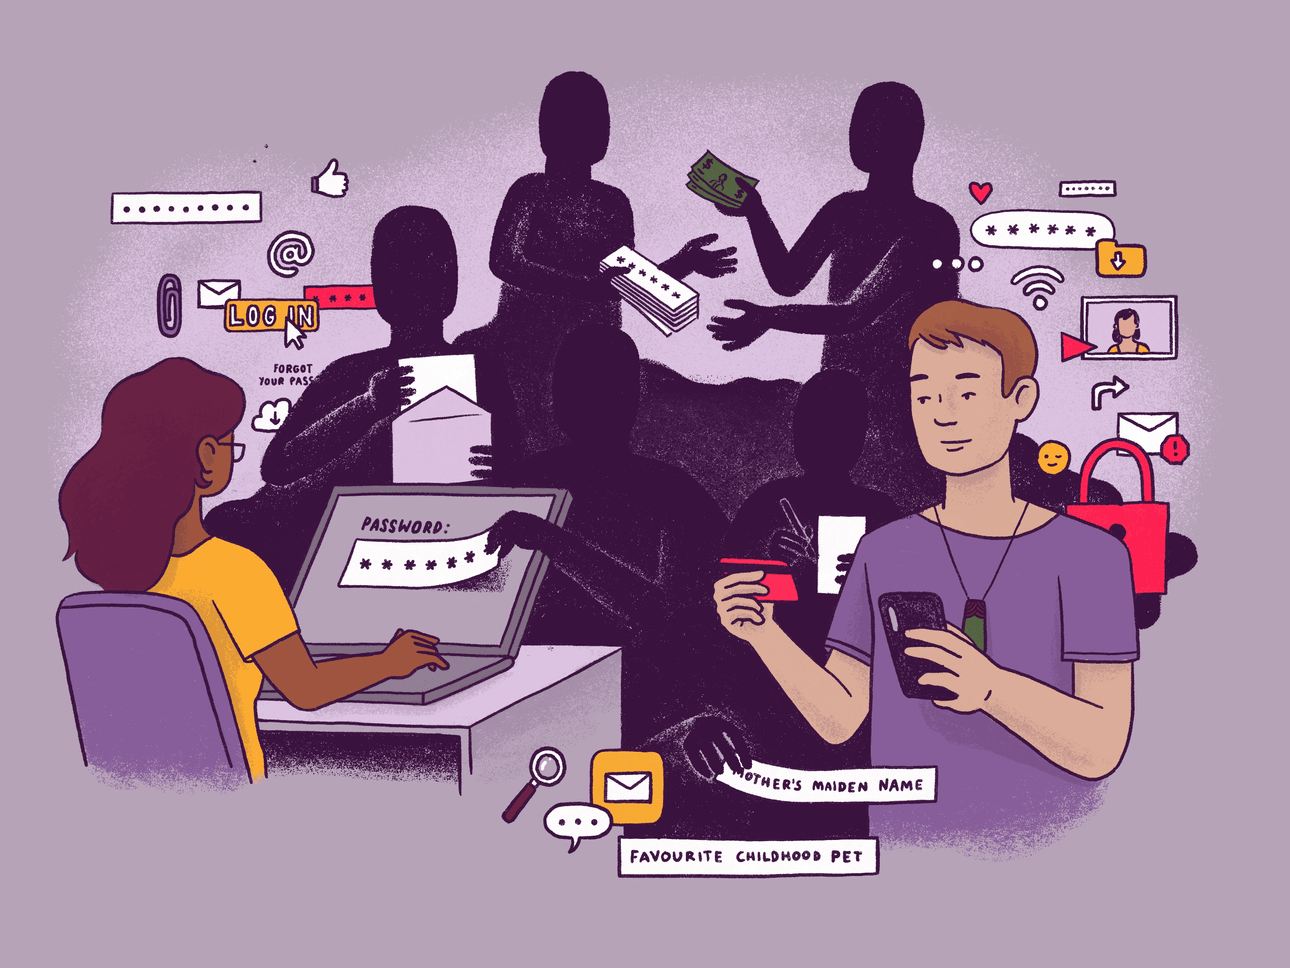 a stylised depiction of data insecurity. people use computers and devices, while shadowy figures eavesdrop and physically steal representations of their personal data